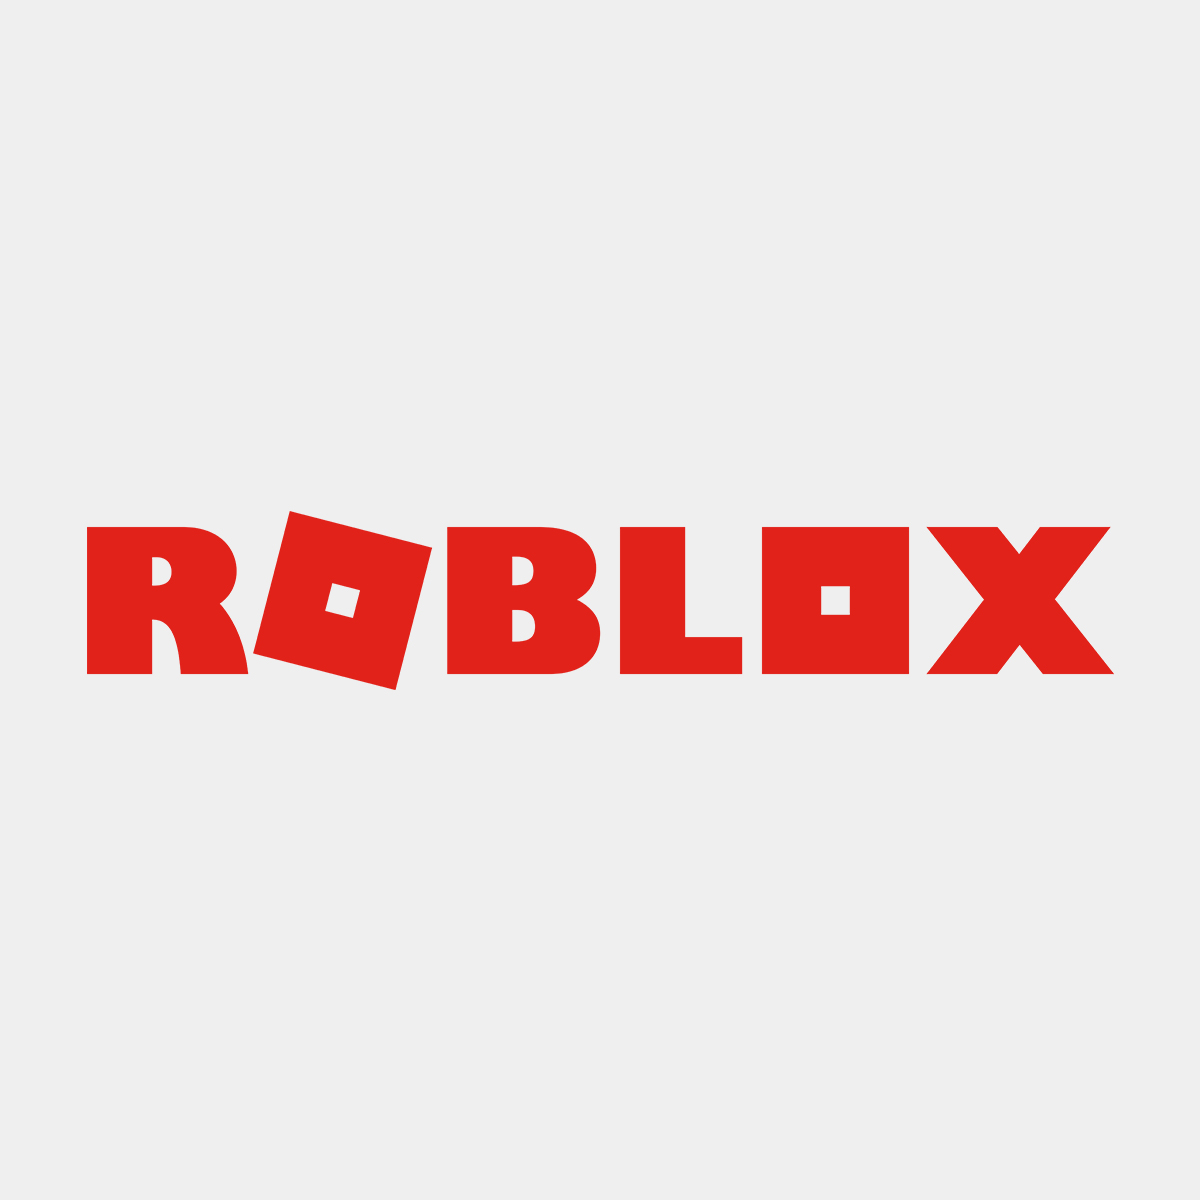 How To Make A Shirt On Roblox 2014 Dreamworks - roblox the movie dreamworks